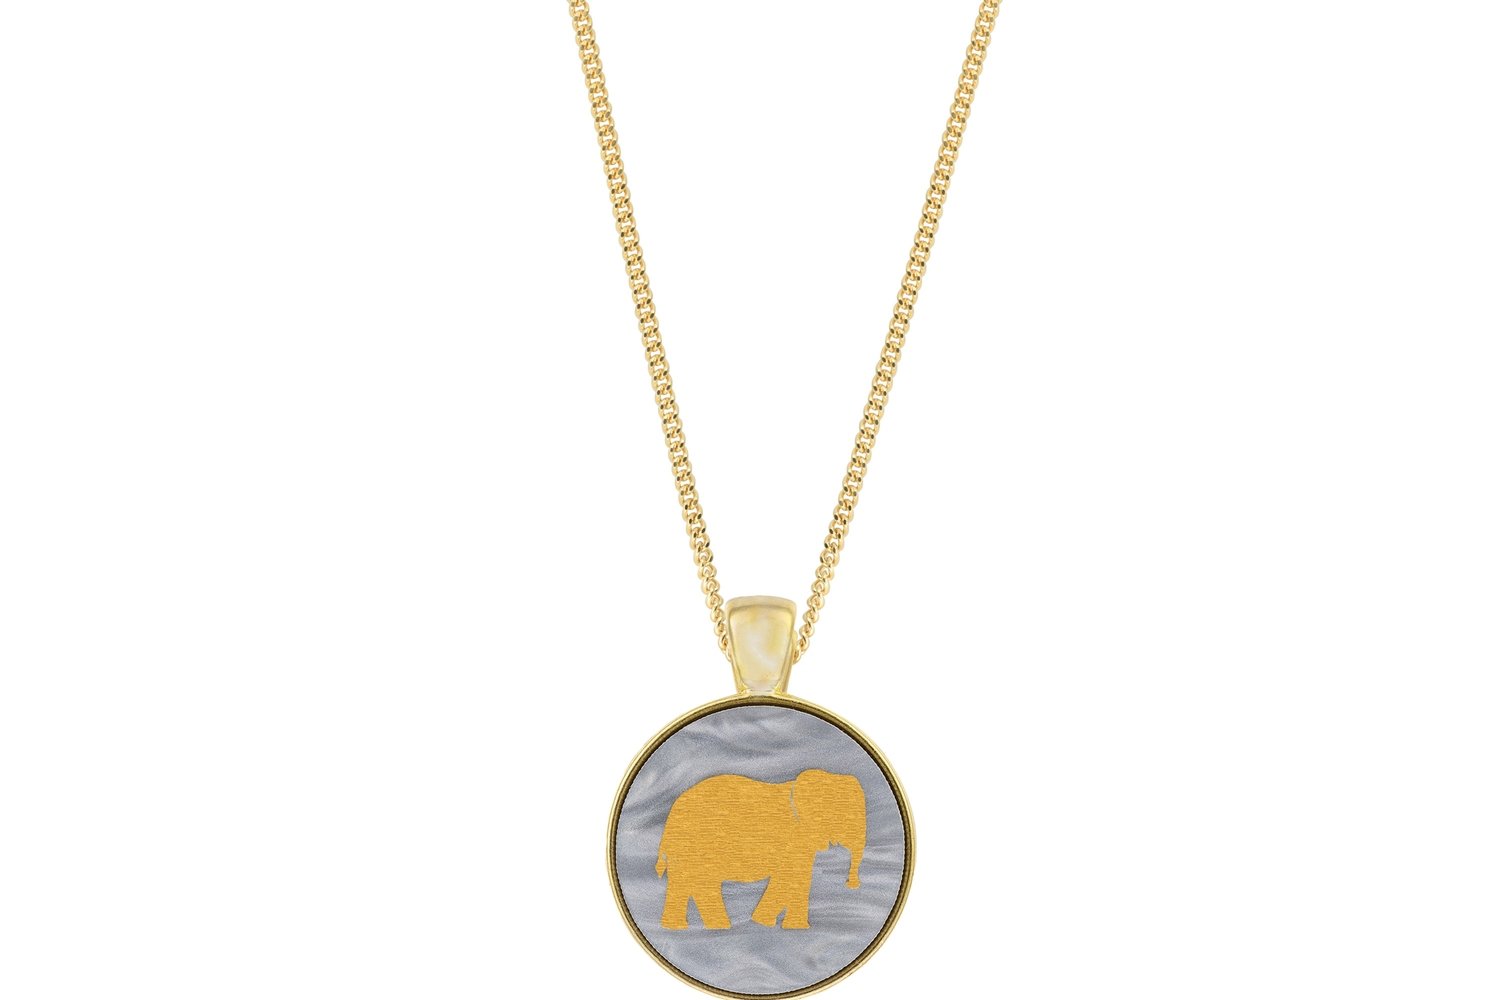 Elephant Pendant Classic Style with Bezel on Chain Necklace